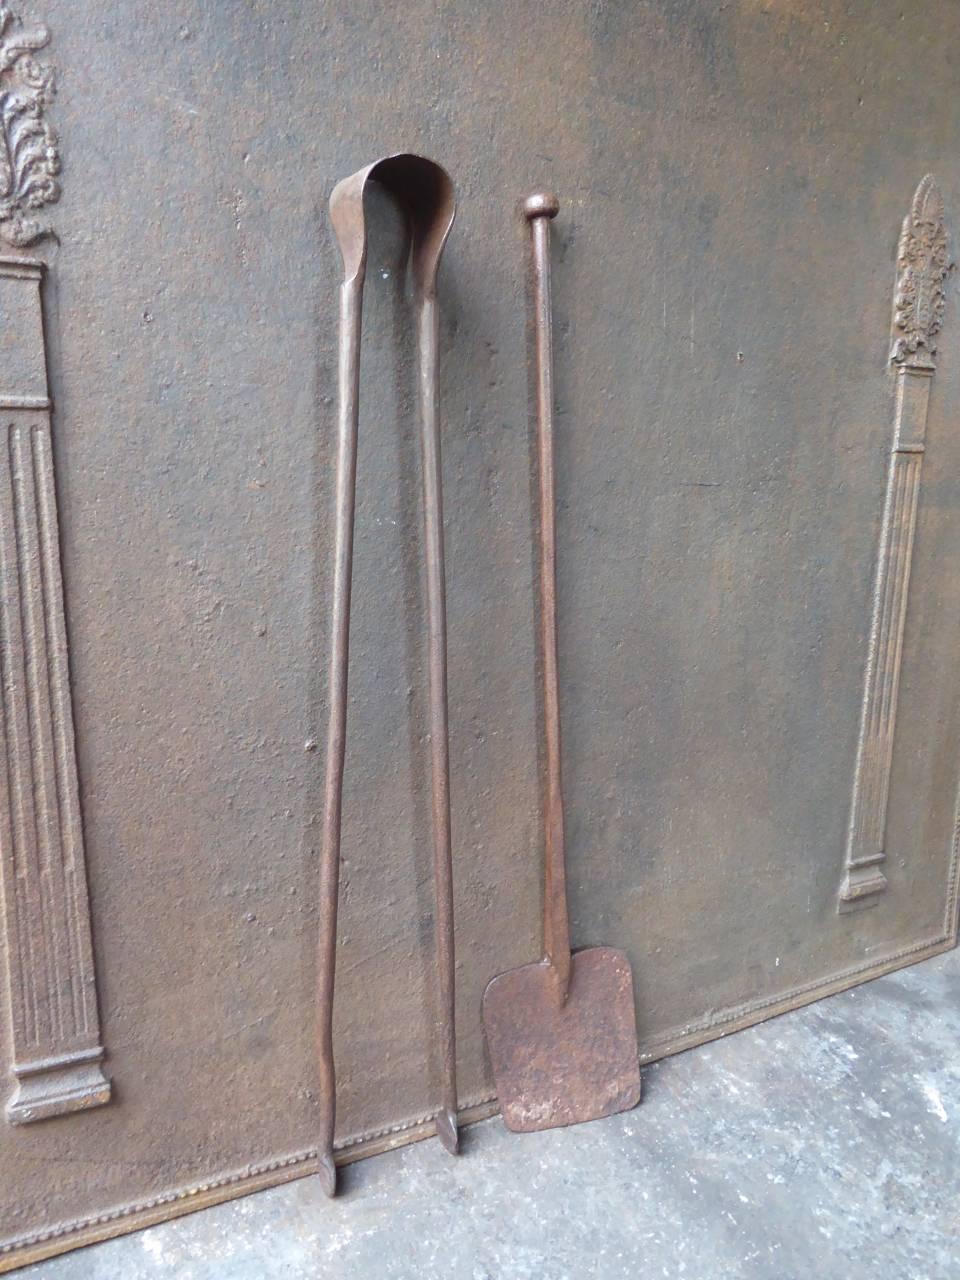 18th century French fireplace toolset made of wrought iron.

We have a unique and specialized collection of antique and used fireplace accessories consisting of more than 1000 listings at 1stdibs. Amongst others, we always have 300+ firebacks, 250+